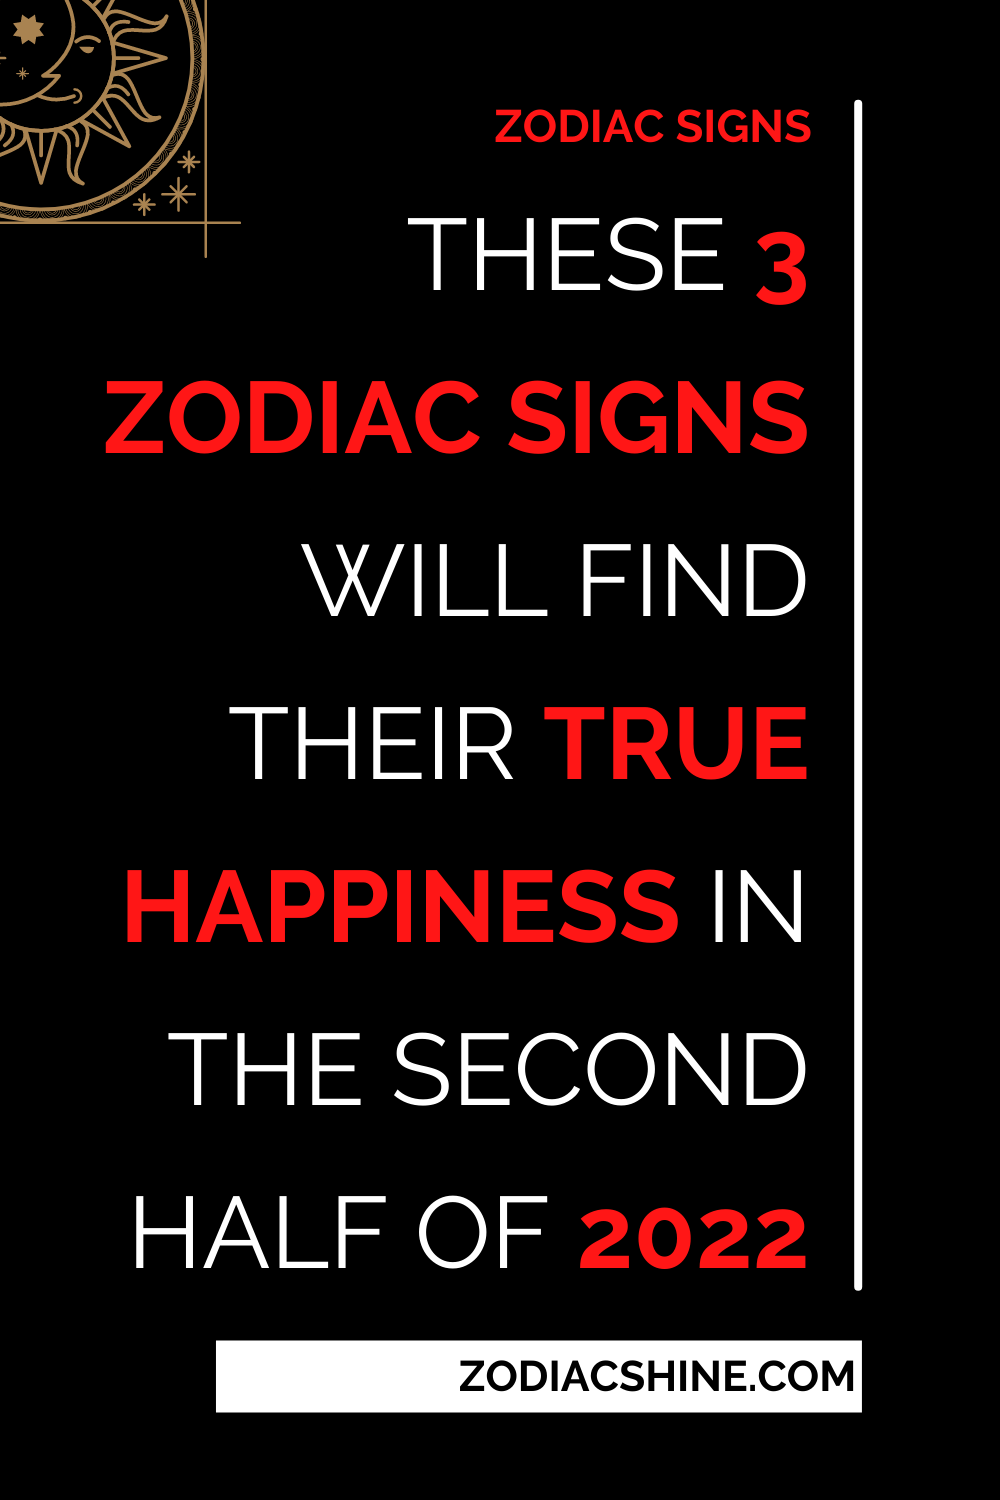 These 3 Zodiac Signs Will Find Their True Happiness In The Second Half Of 2022